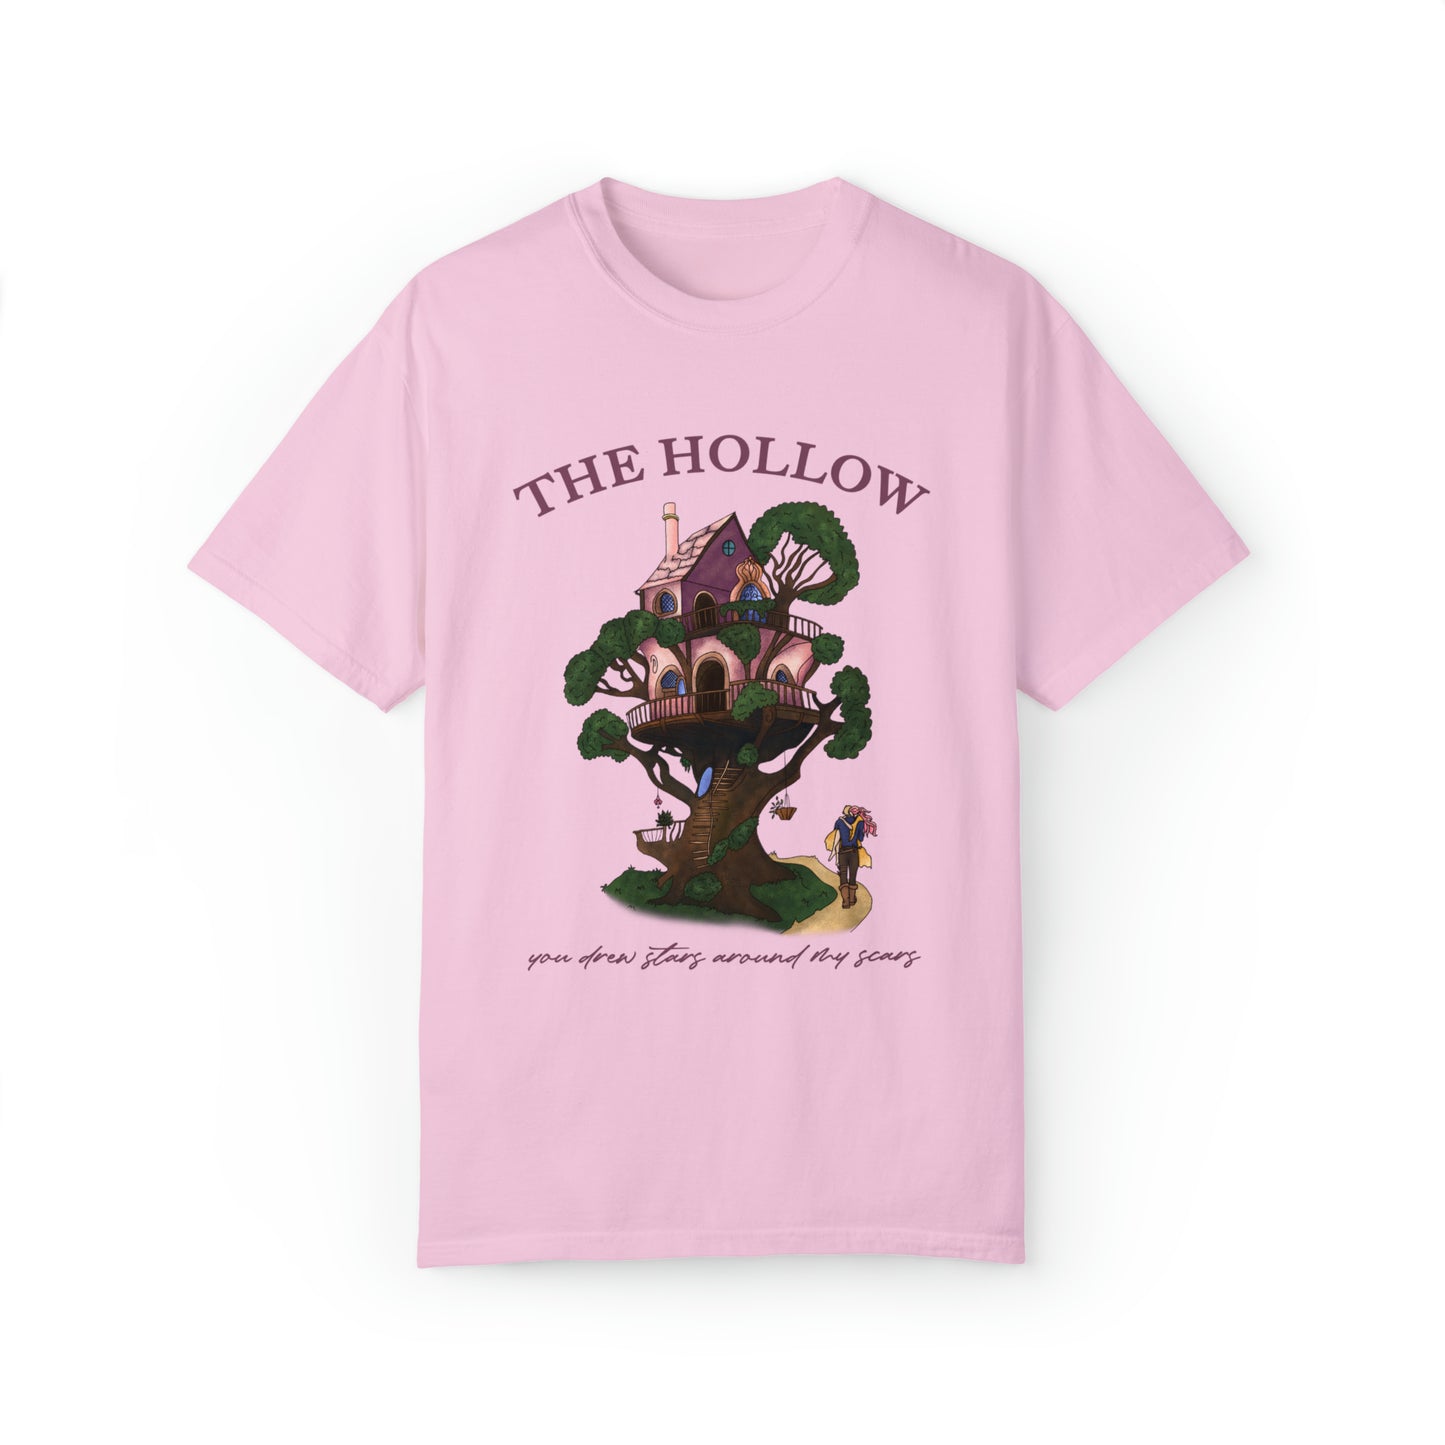 The Hollow Tee